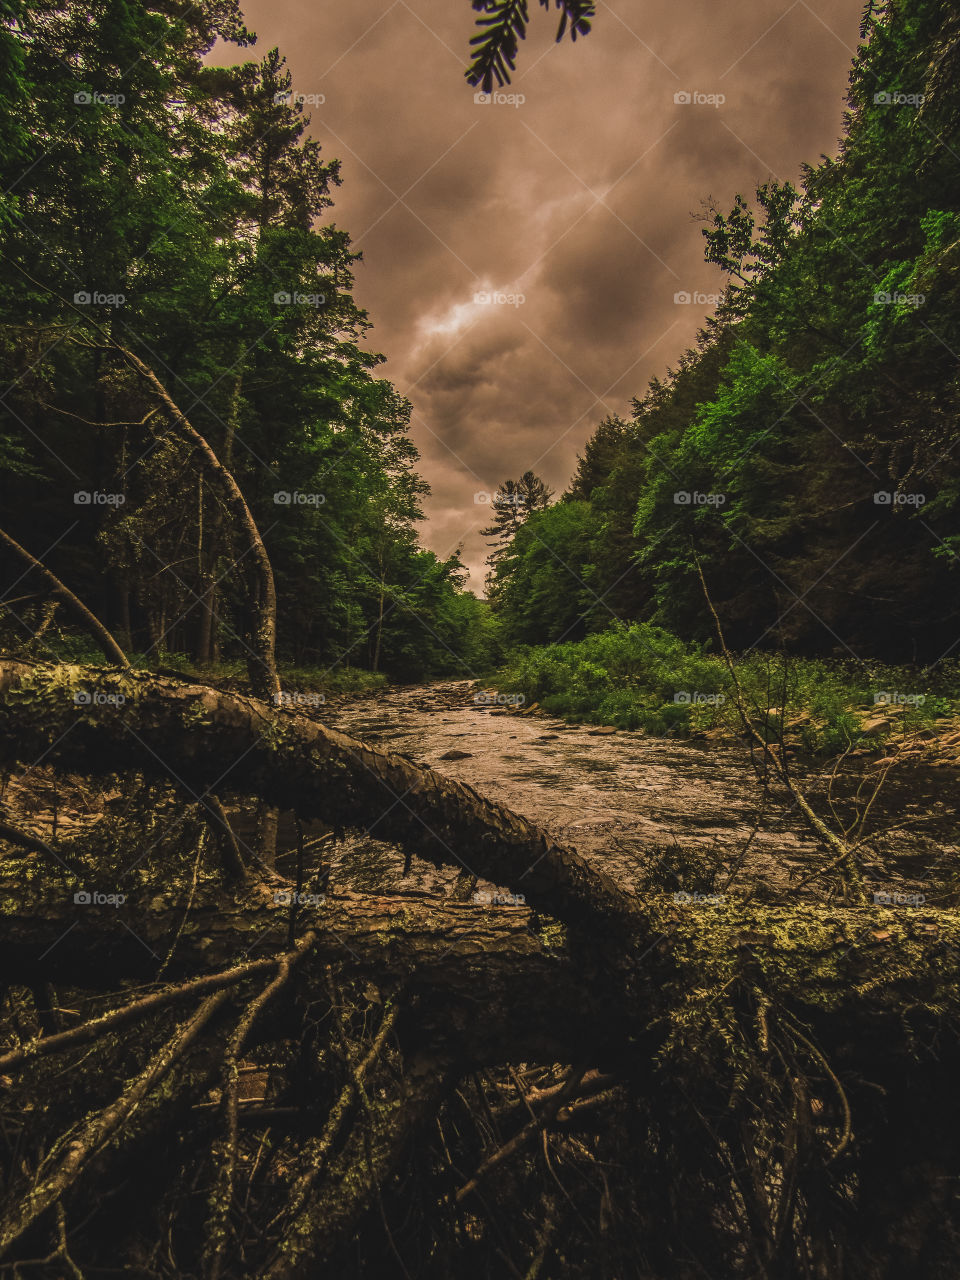 Arkville, New York, sun, sky, clouds, mountains, river, nature summer, top of the mountain , Landscape, view, panoramic view, forest, river, fallen tree, 